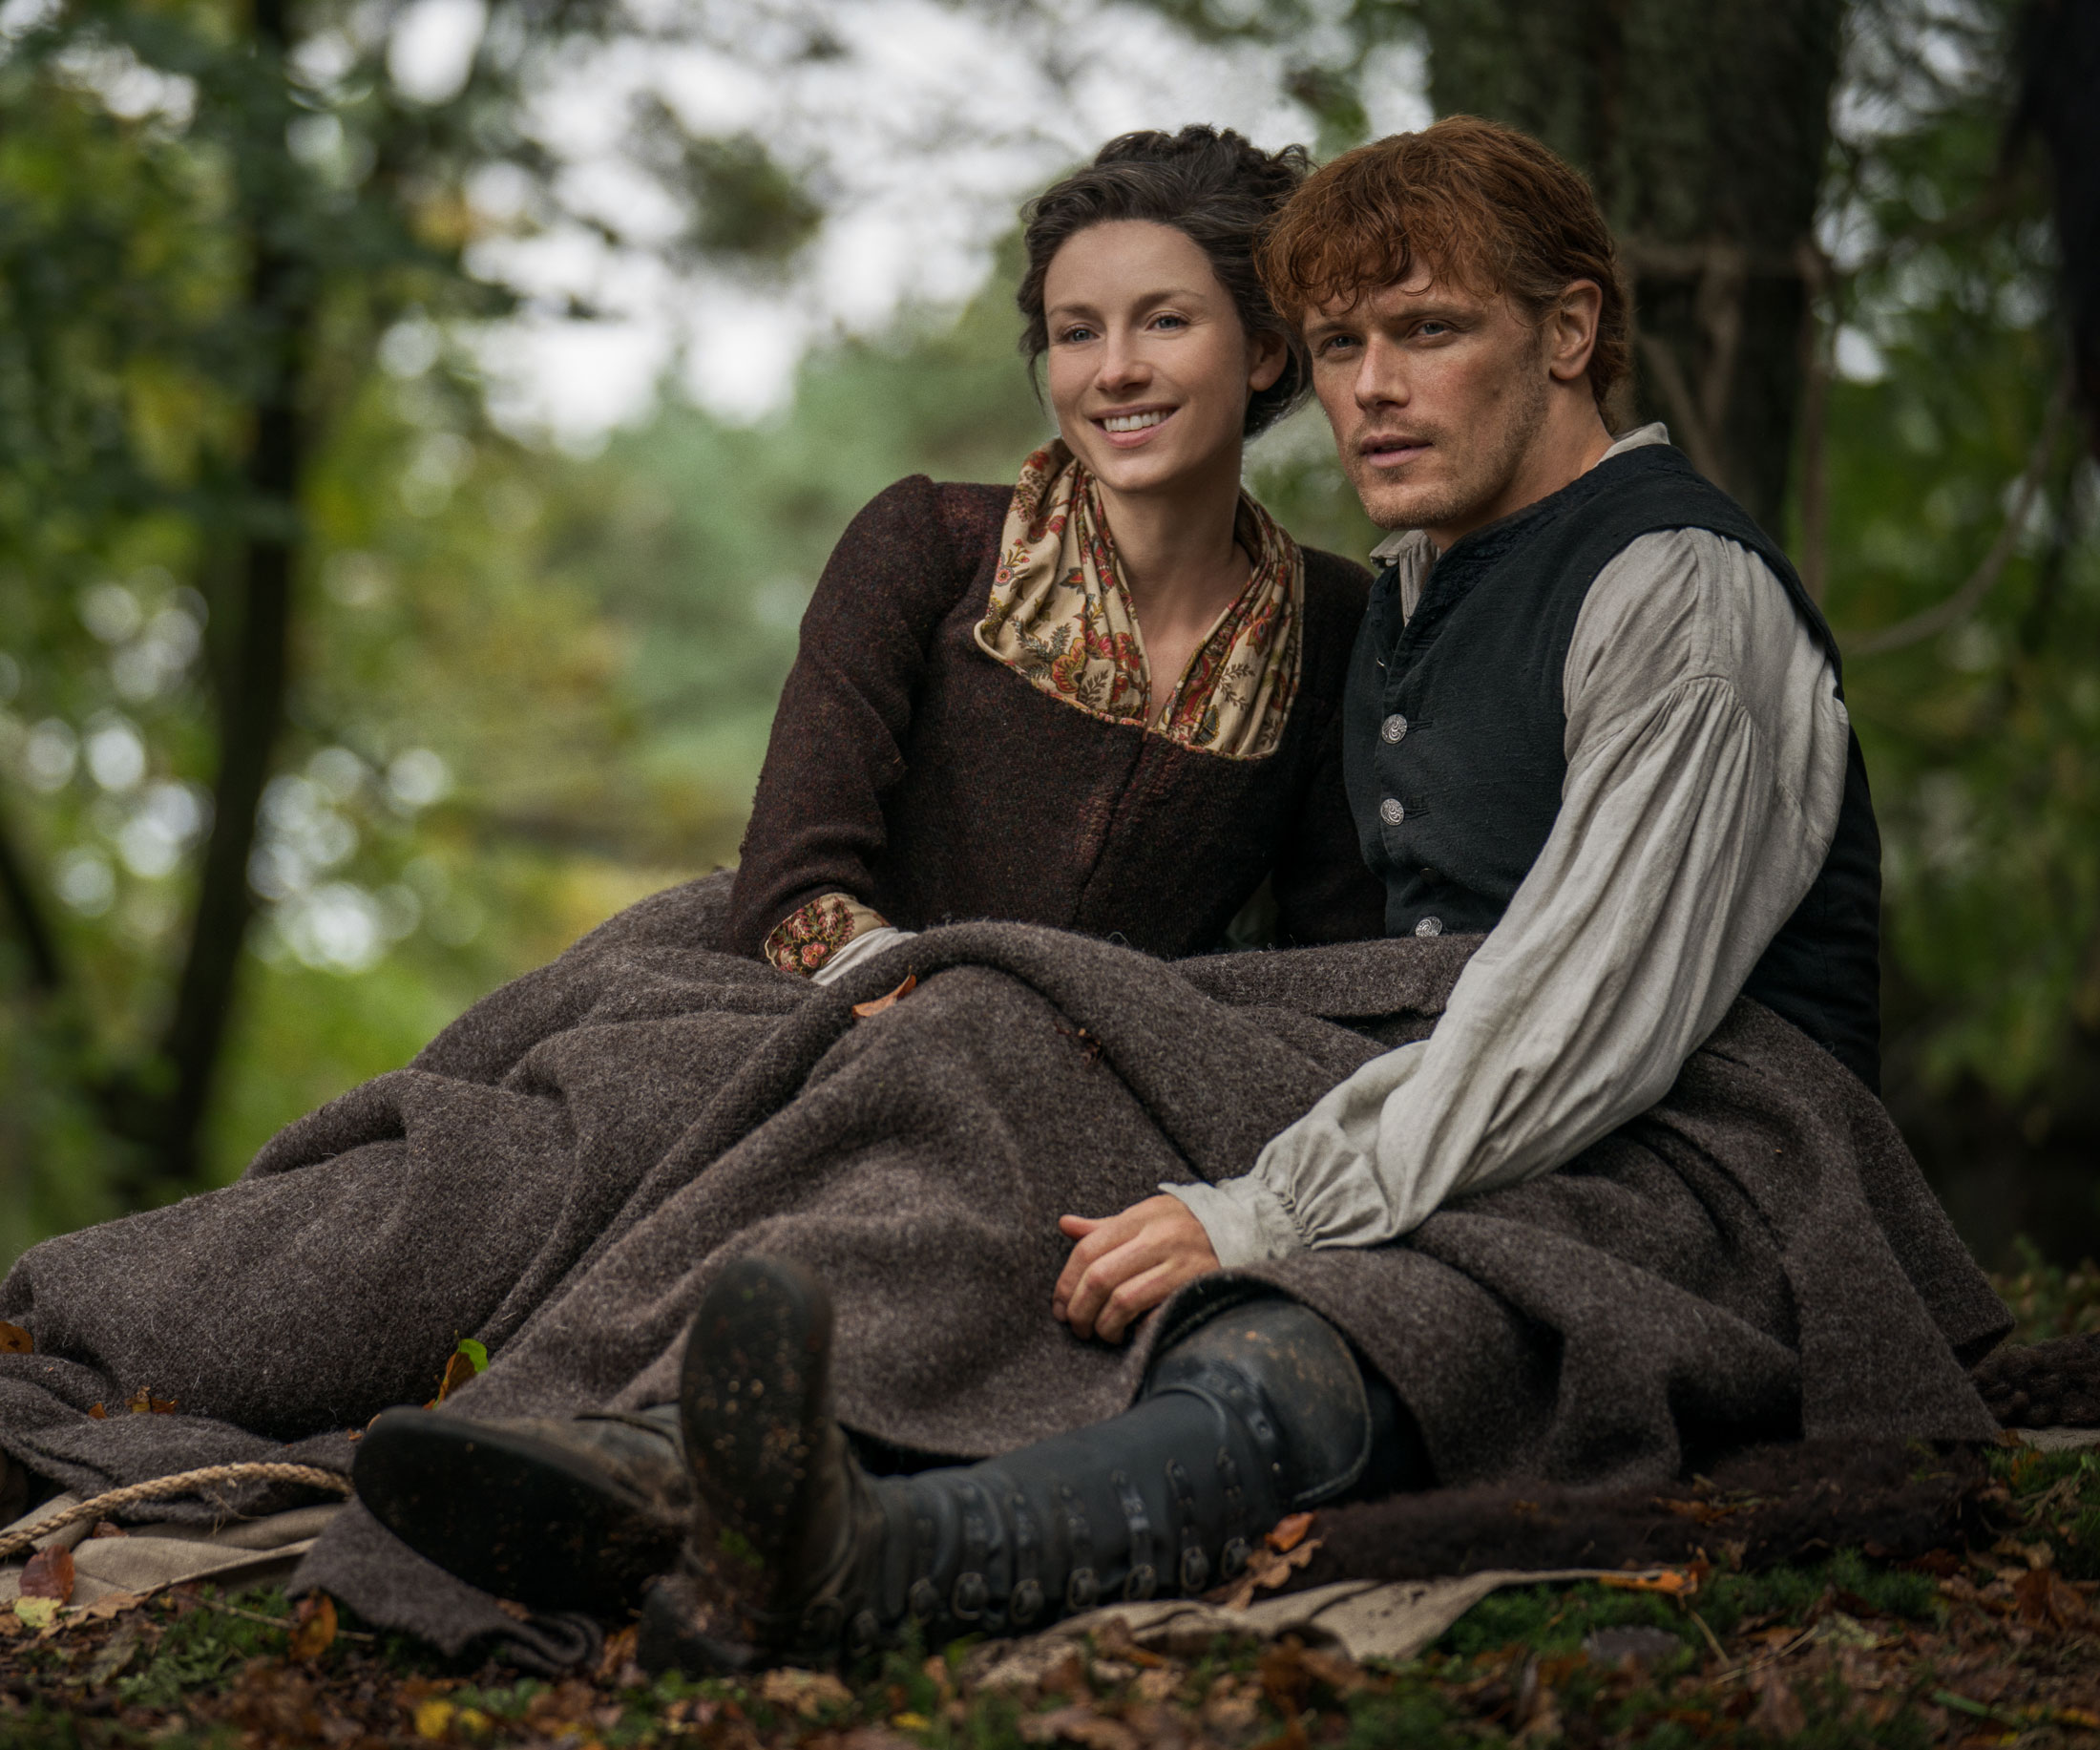 TV WEEK goes behind the making of the season four DVD of Outlander